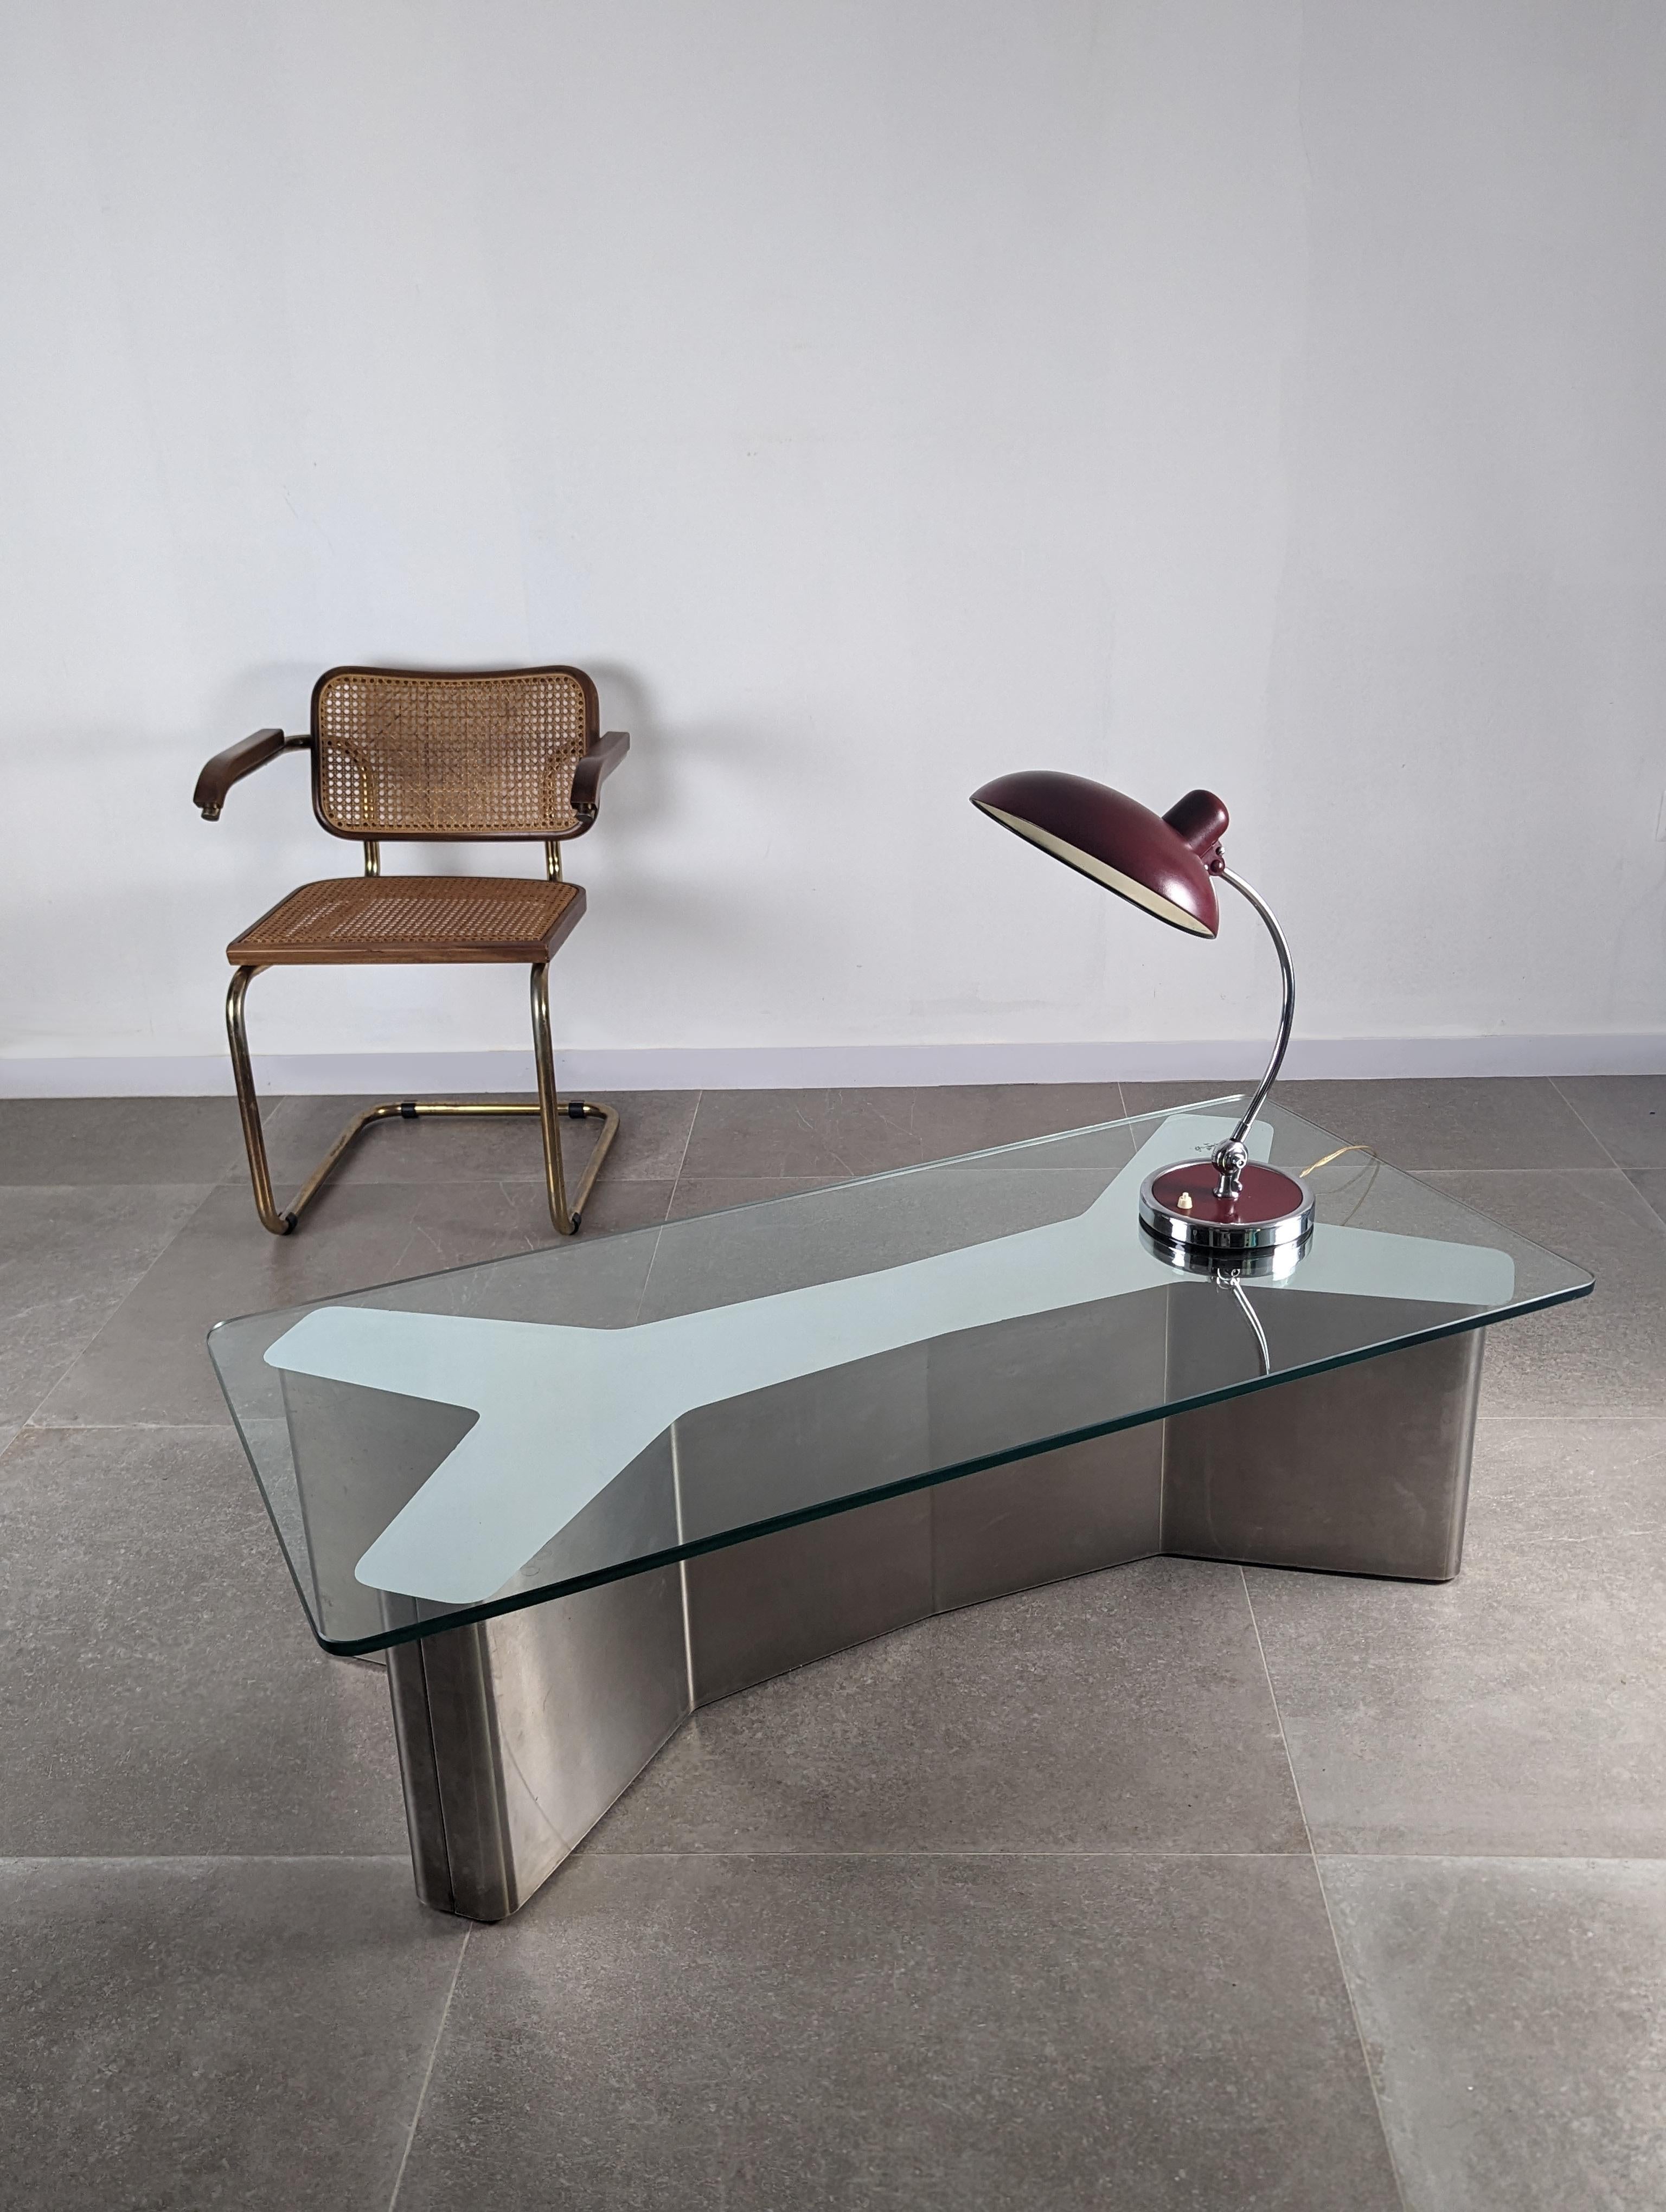 Spectacular coffee table with a fantastic double ypsilon design made of stainless steel and glass with a central mirror that gives us an elegant visual fusion between the two. Design and exclusivity come together in this table to enhance any room